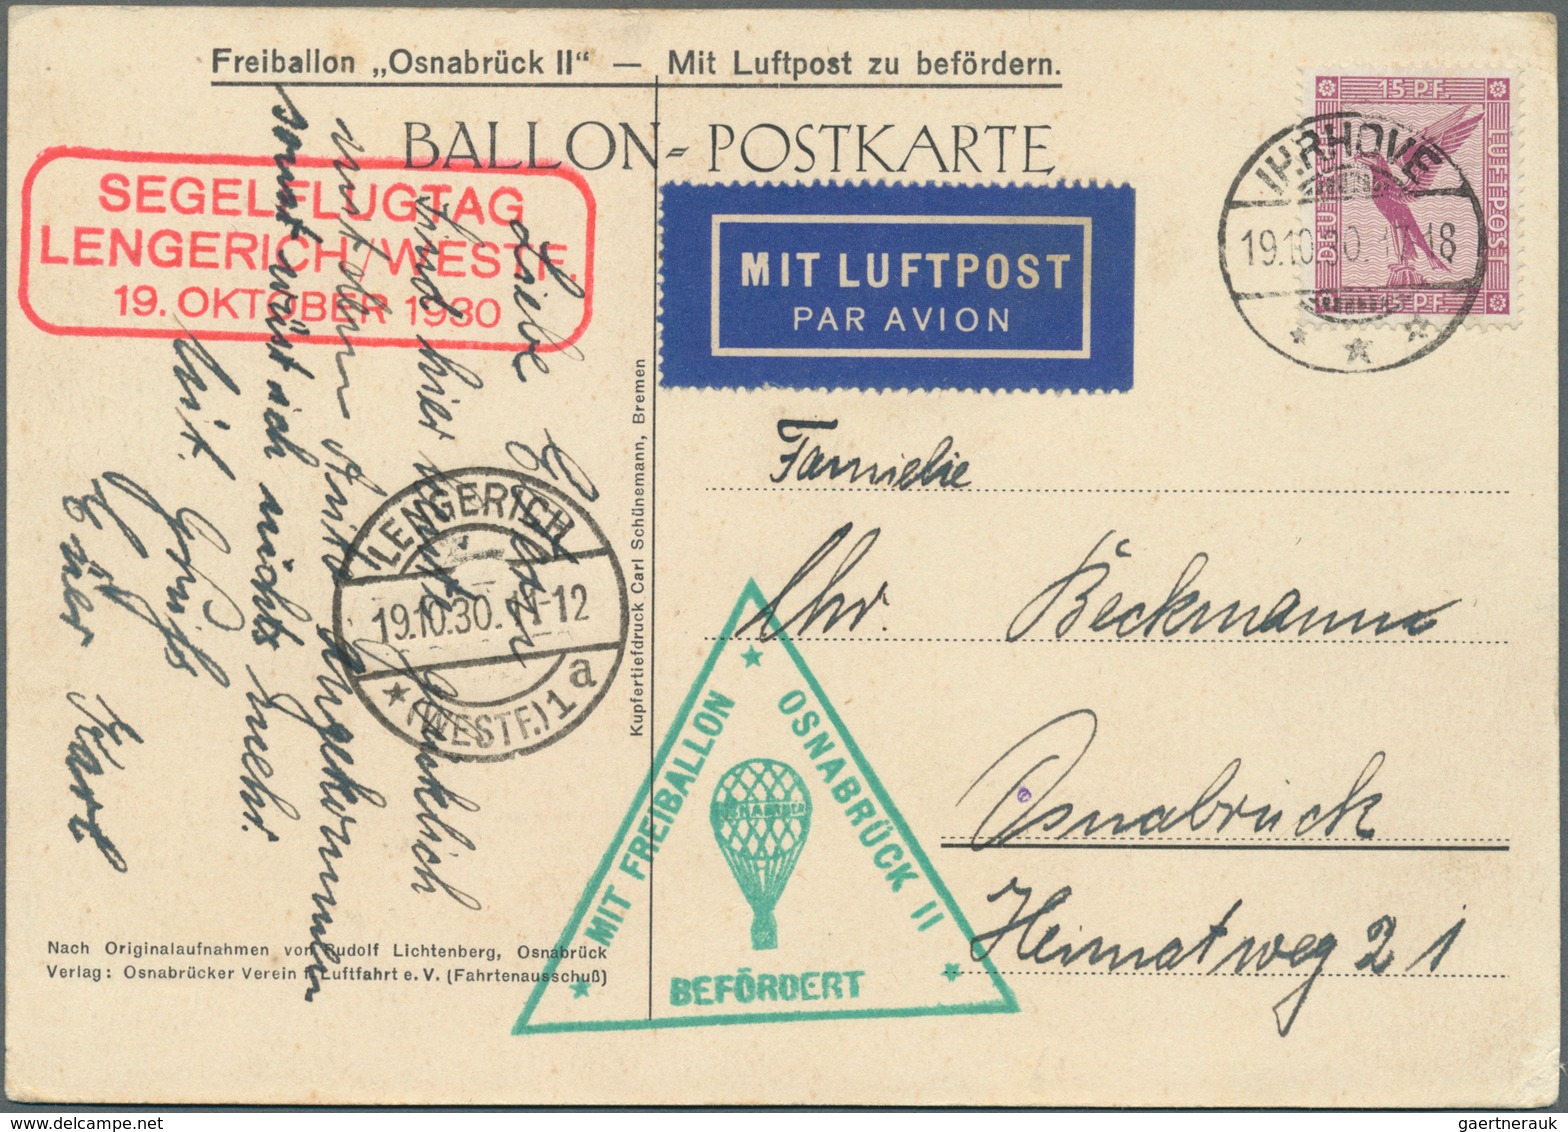 Ballonpost: 1927/1955, lot of 26 balloon mail covers/cards, mainly Europe incl. Germany, e.g. 1927 S